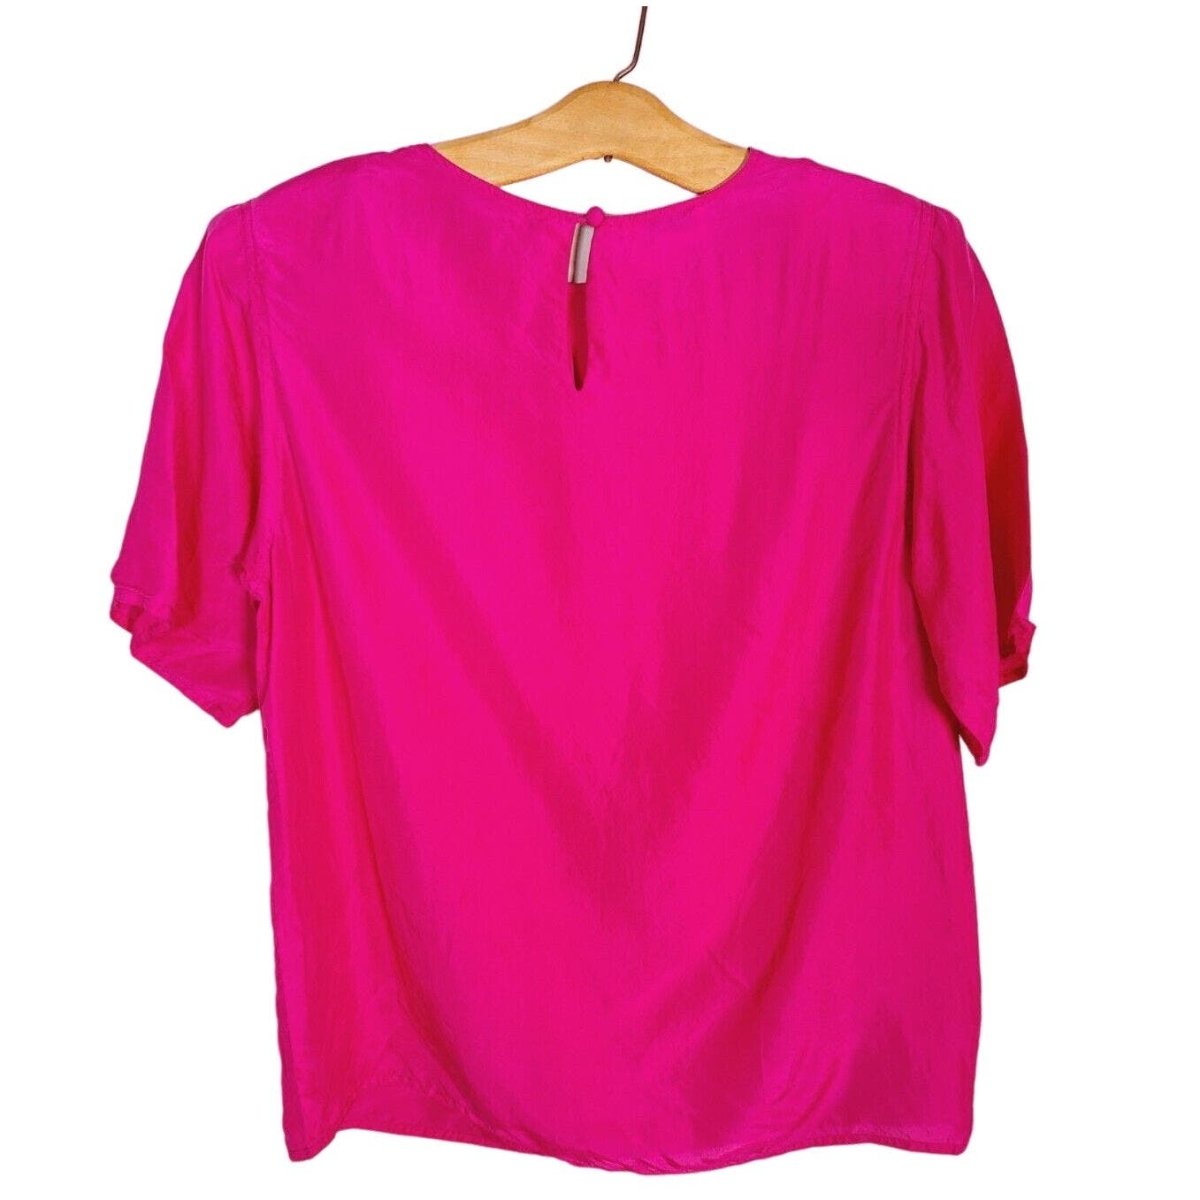 Vintage All Silk Boxy Hot Pink Blouse Women Size Medium AS IS - themallvintage The Mall Vintage